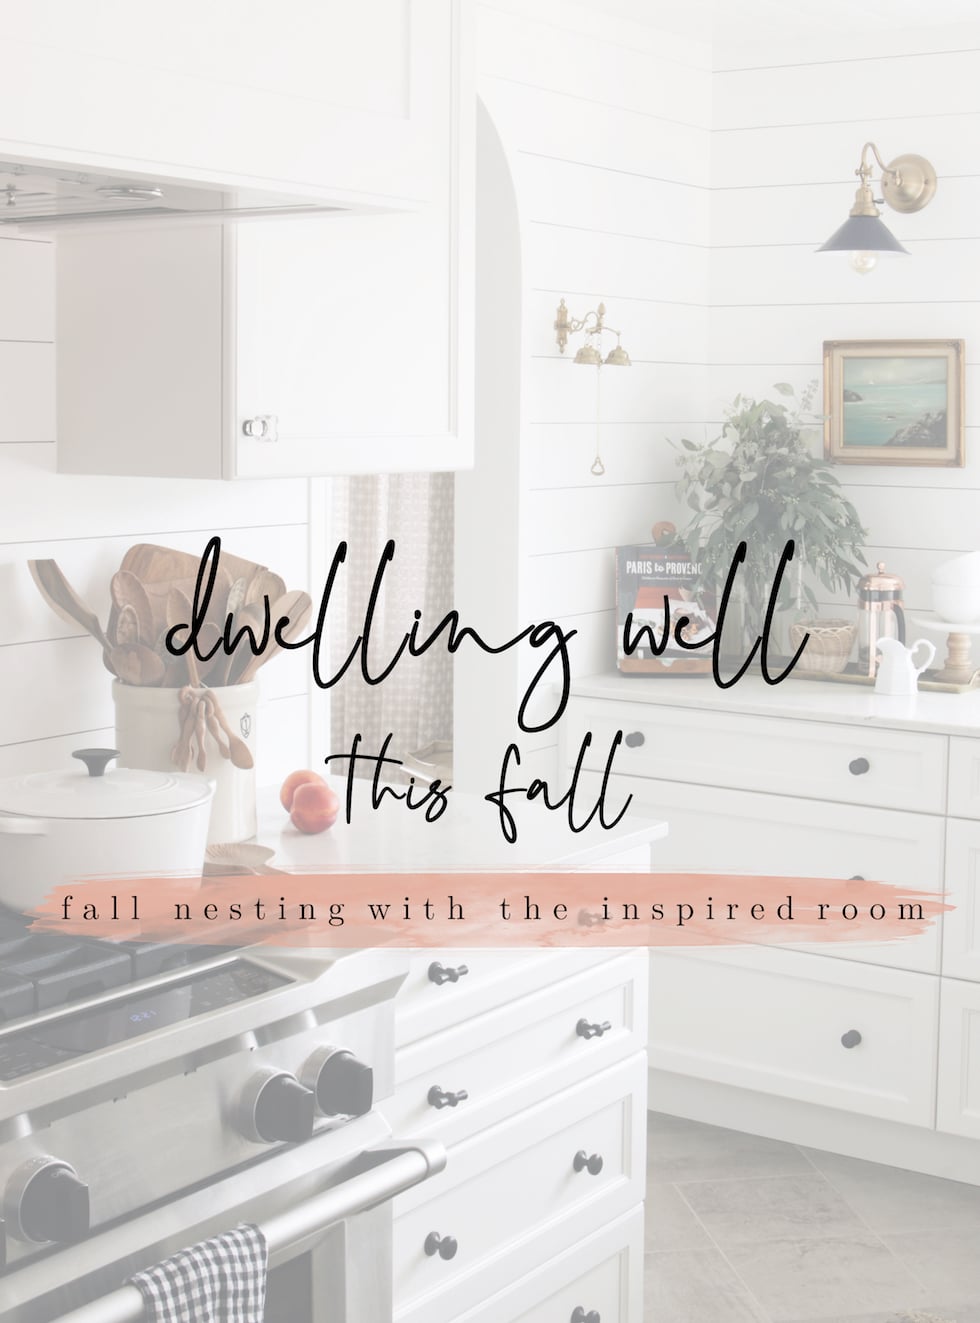 How to Dwell Well this Fall